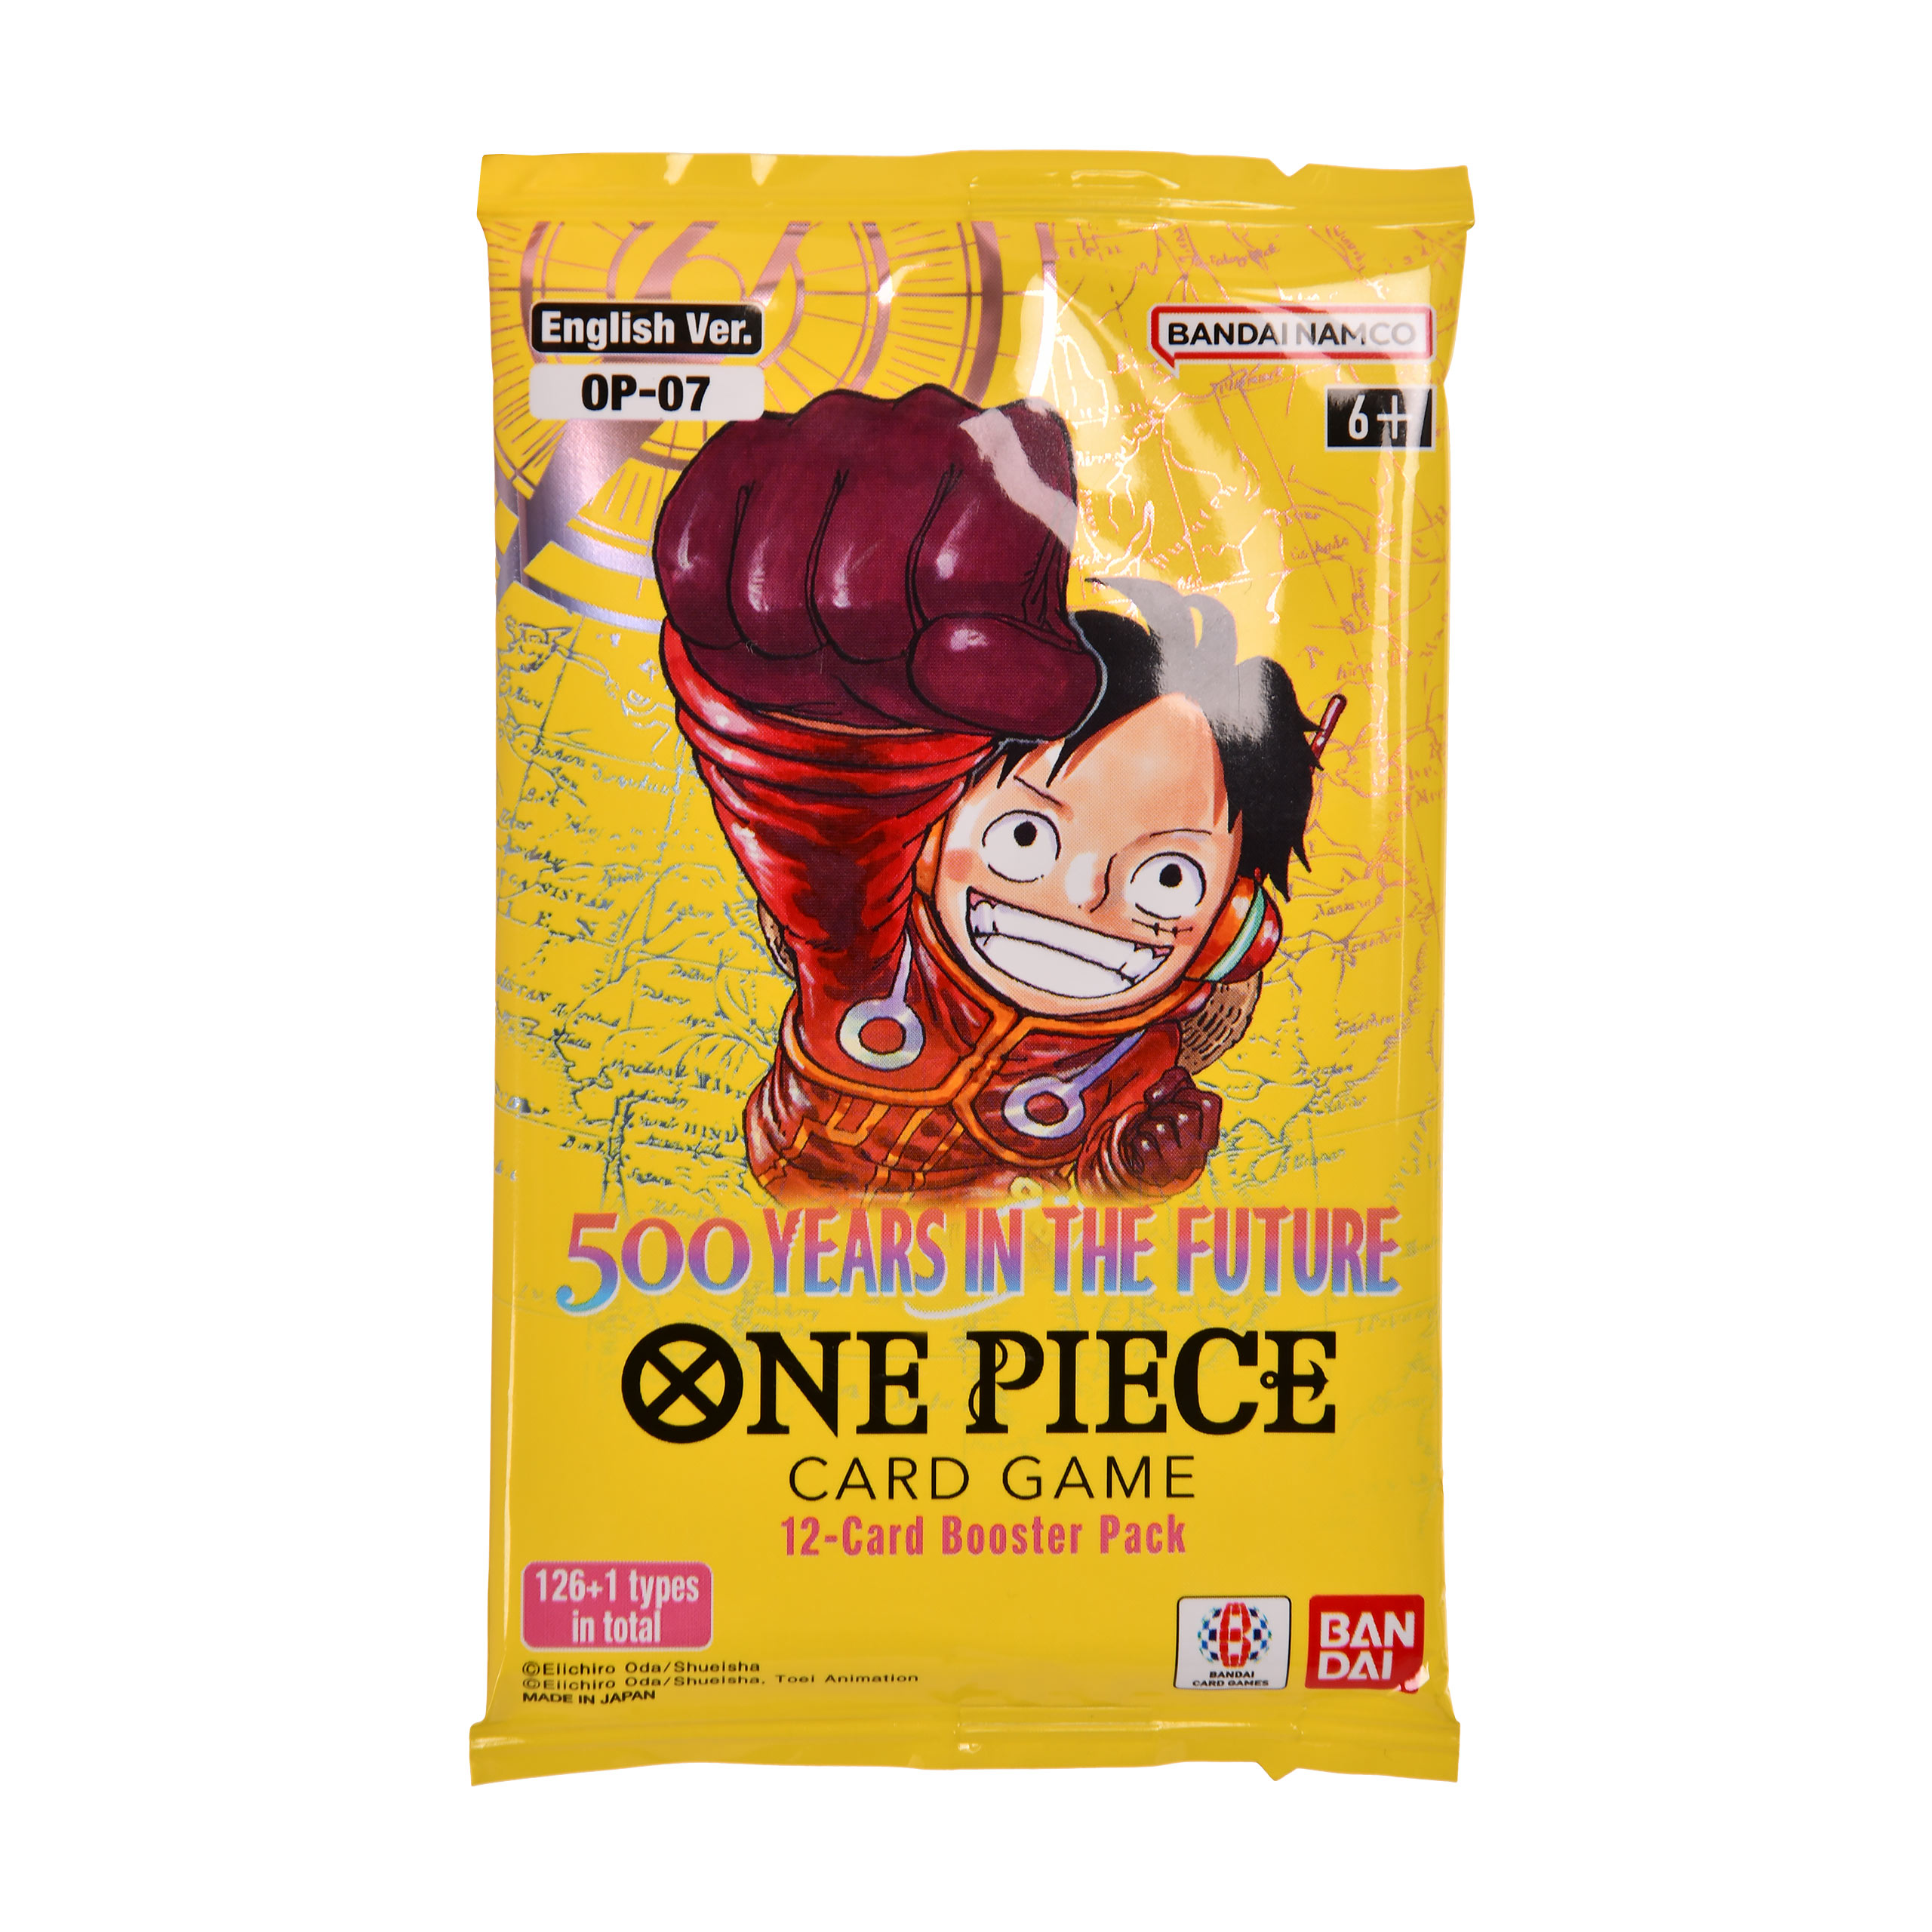 One Piece Card Game - 500 Years into the Future Collector's Booster